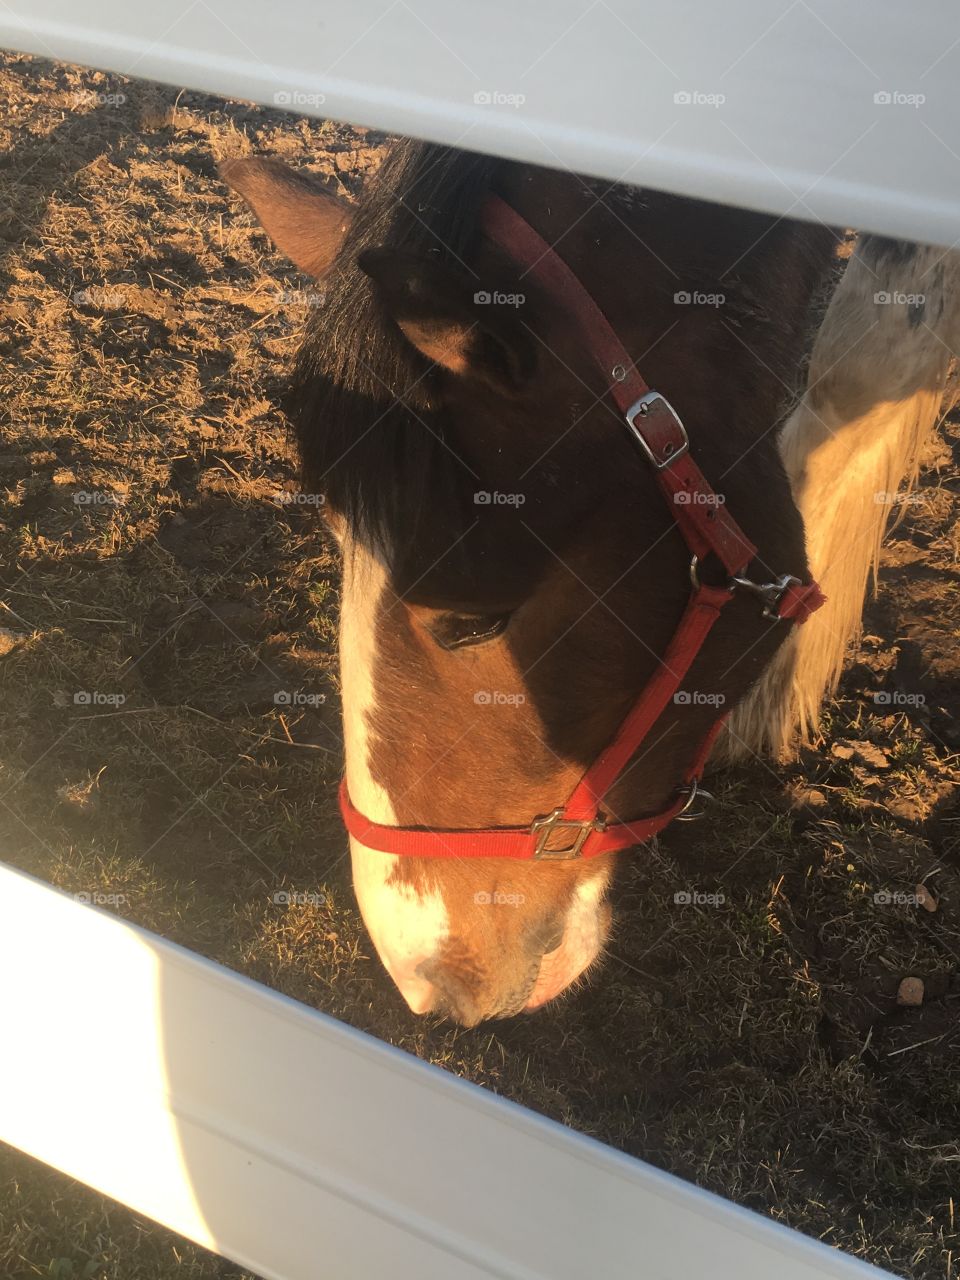 Clydsdale horse in red halter in a fence